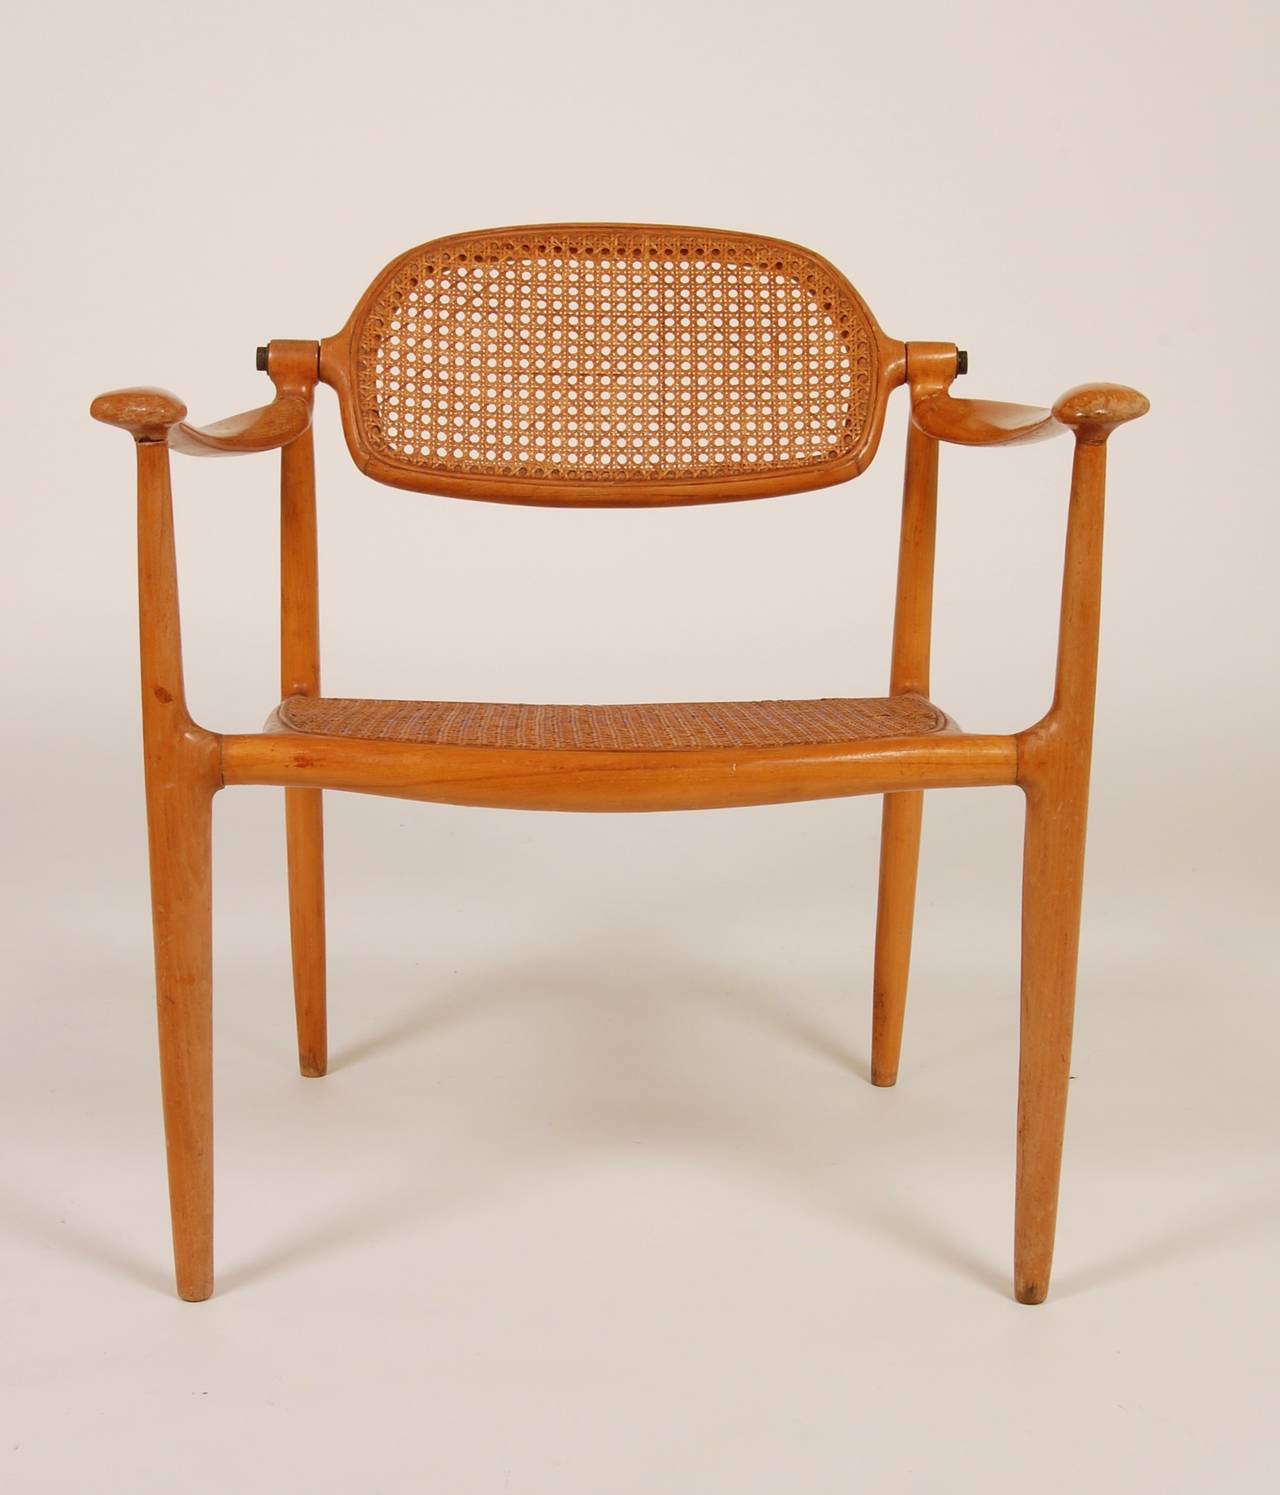 Designed and created in 1950, this was the first chair produced by Paul Tuttle with the help of a cabinetmaker friend in Santa Barbara who happened to be his neighbor. In 1951 the chair was shown in the Saint Louis Museum in the Designer-Craftsman